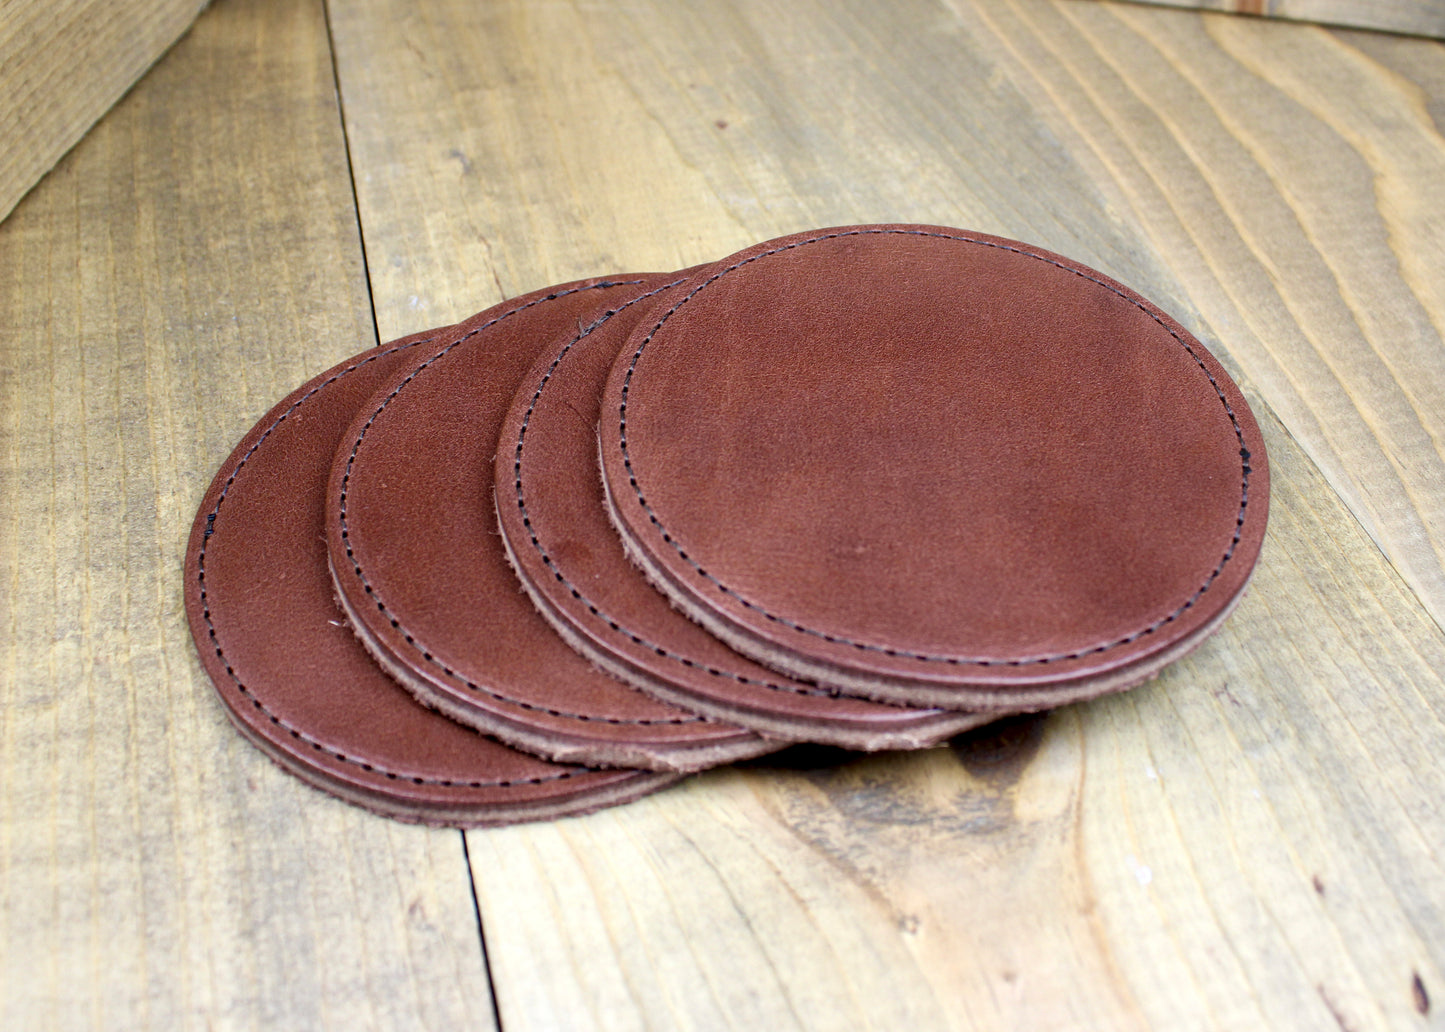 Medium Brown Leather Coasters set of 4. 4 pack coasters. handmade coasters. gift for men. 3rd anniversary gift. leather gift men. coasters handmade. round coasters. personalized coasters. 